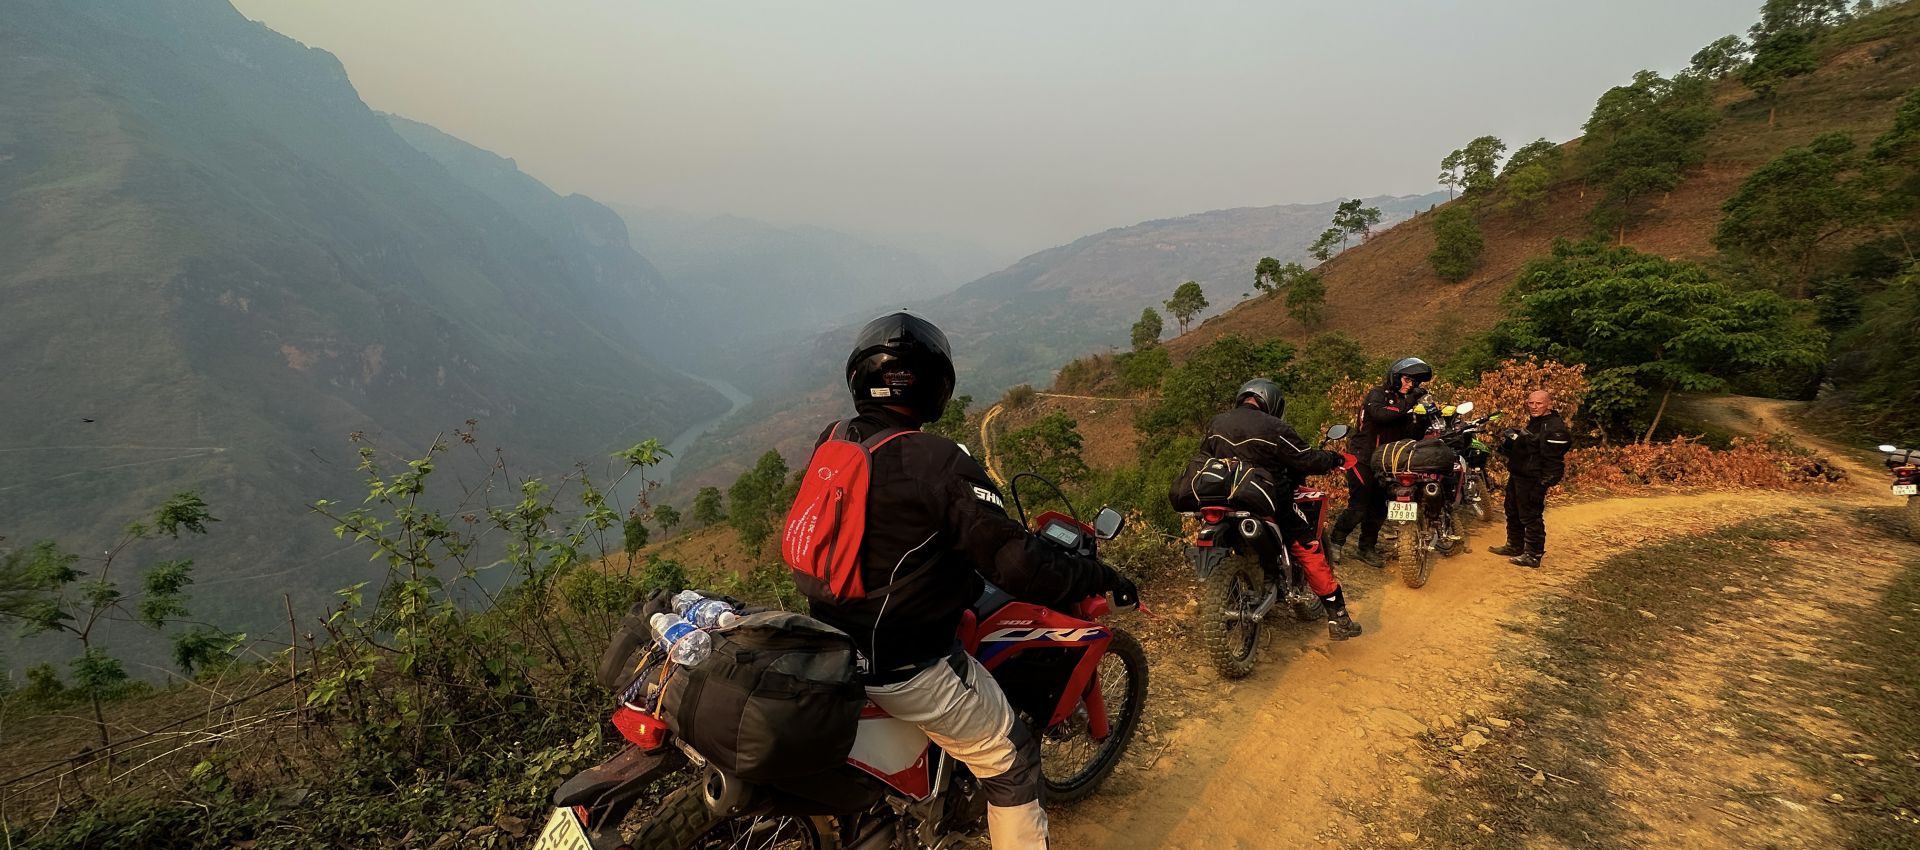 Uncharted Vietnam: 11-Day Motorbike Expedition - Northwest & Central Wonders